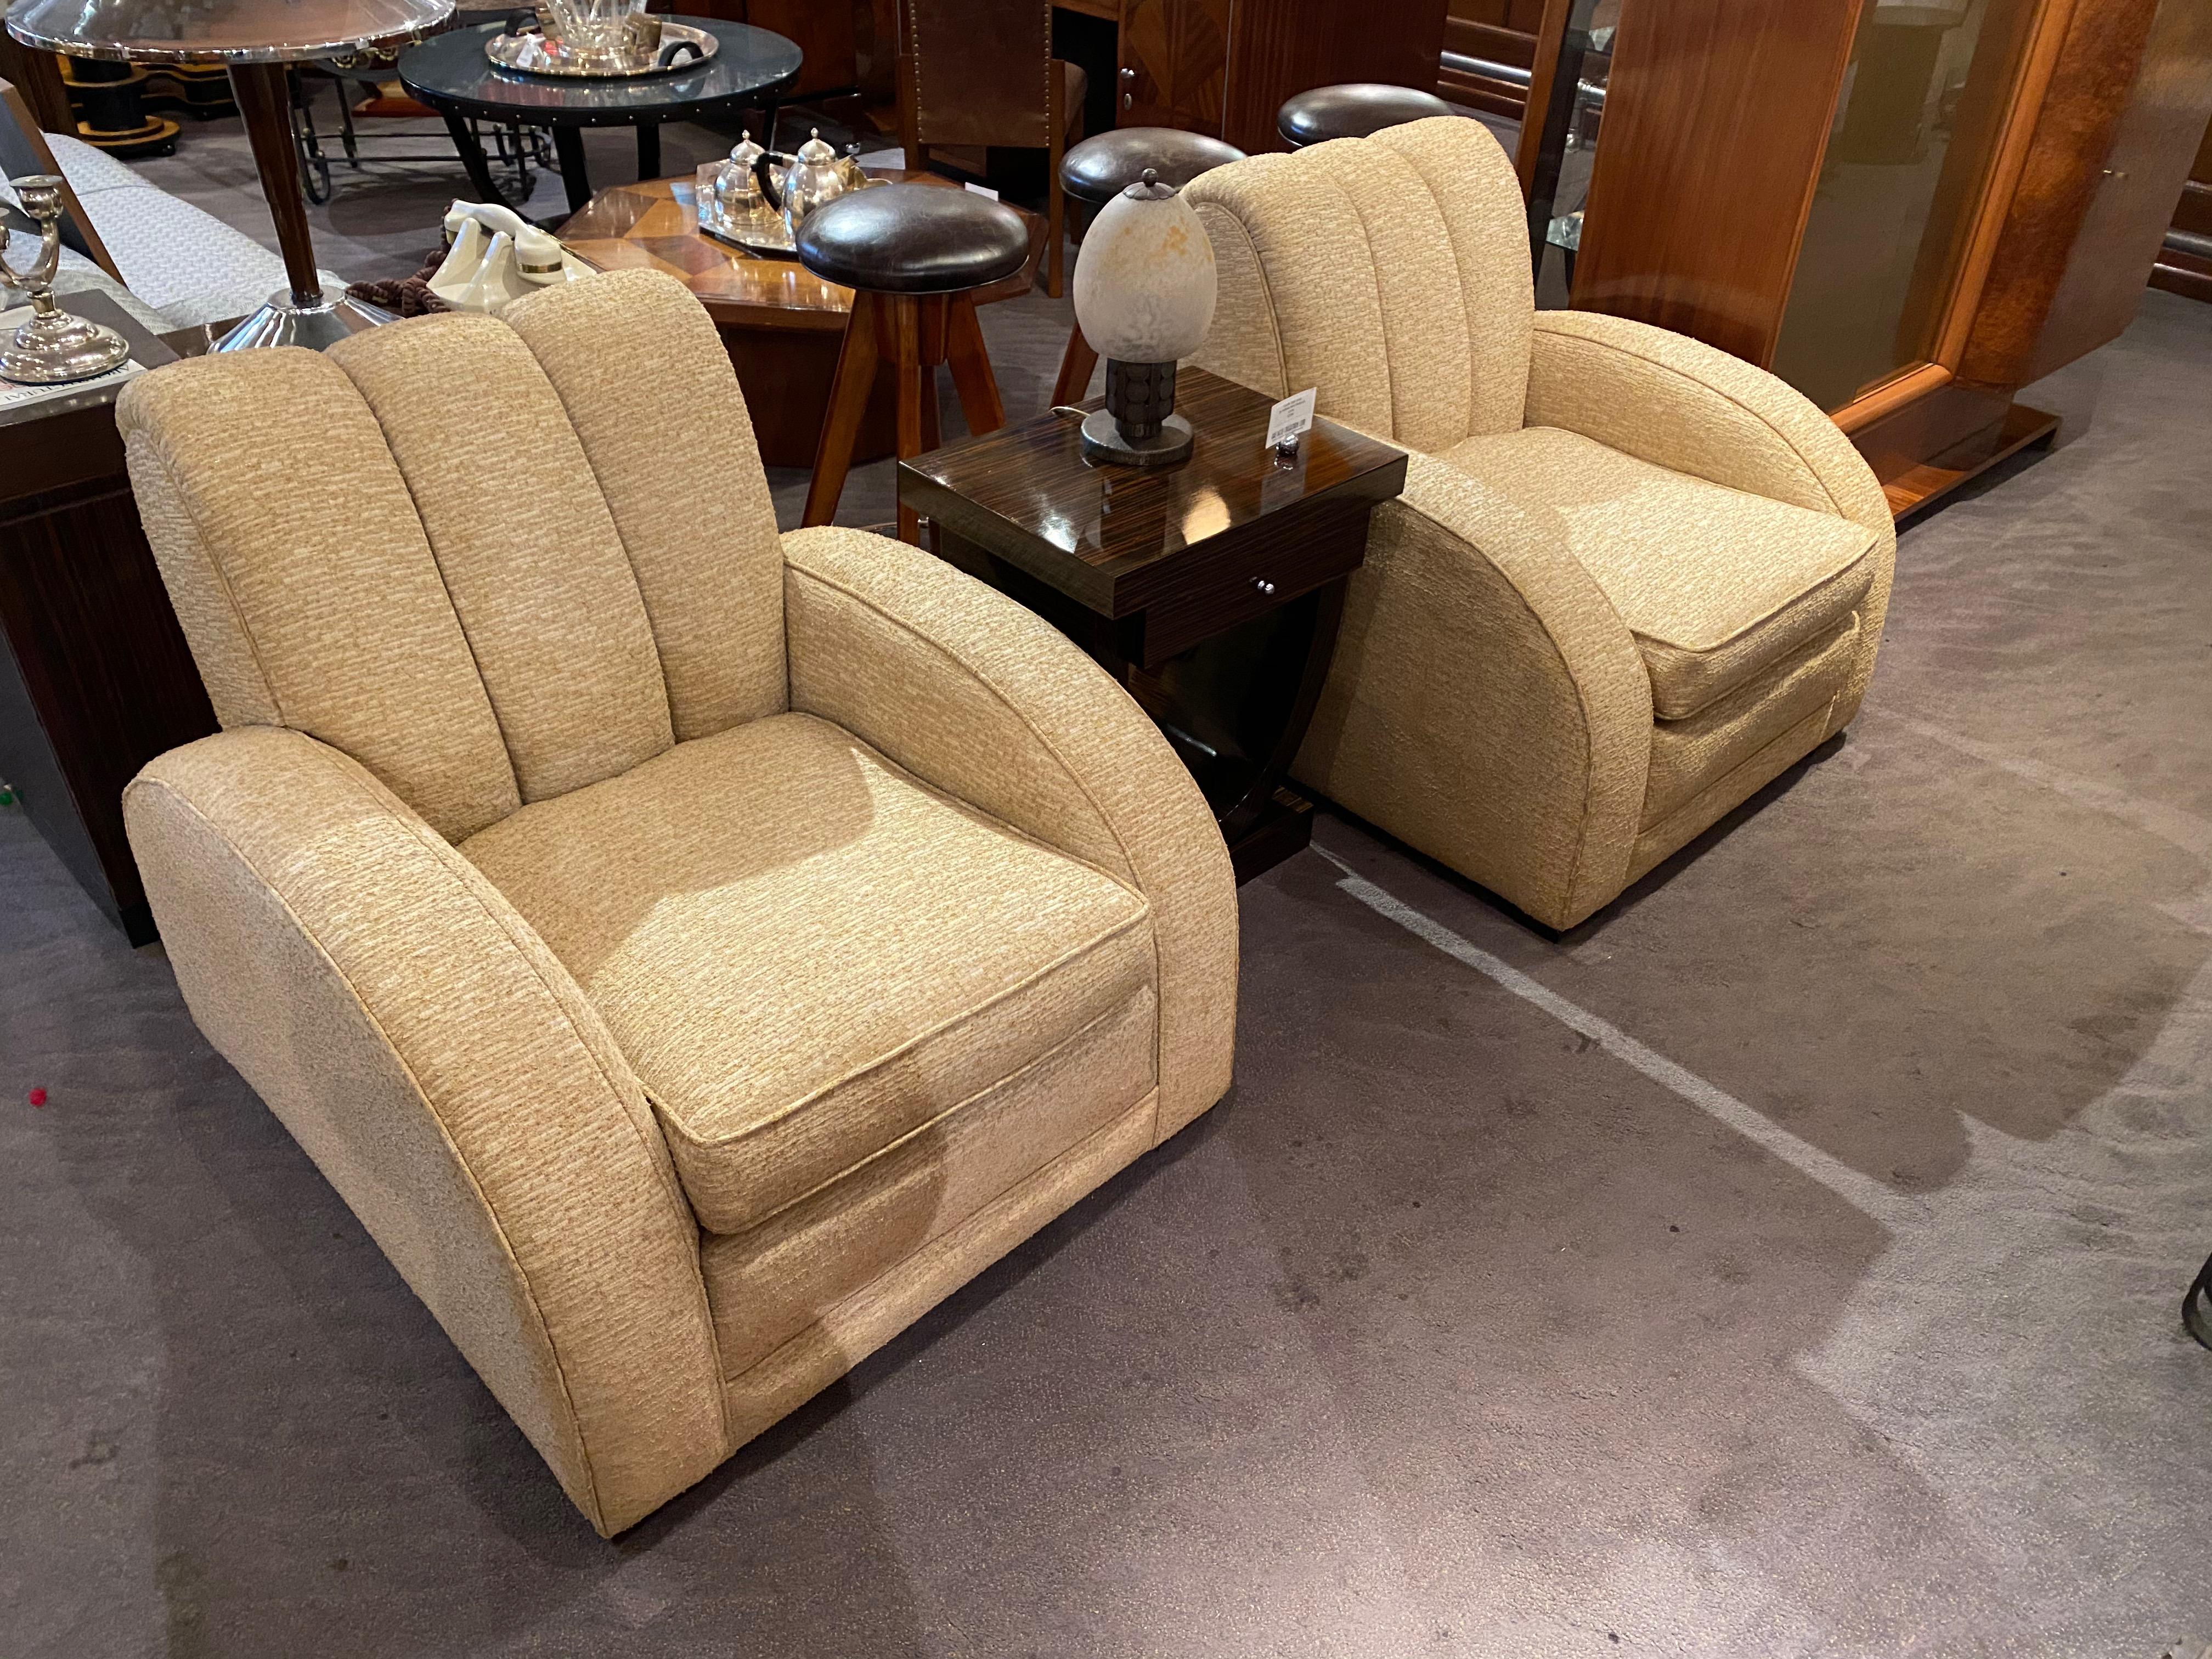 Art Deco Jazz club chairs in the style of Paul T.Frankl speed chairs. Great size and comfortable channel back design. This is one of my favorite shapes and sizes. Great over-size look but relatively small in size. Designed in the 1930s shown here